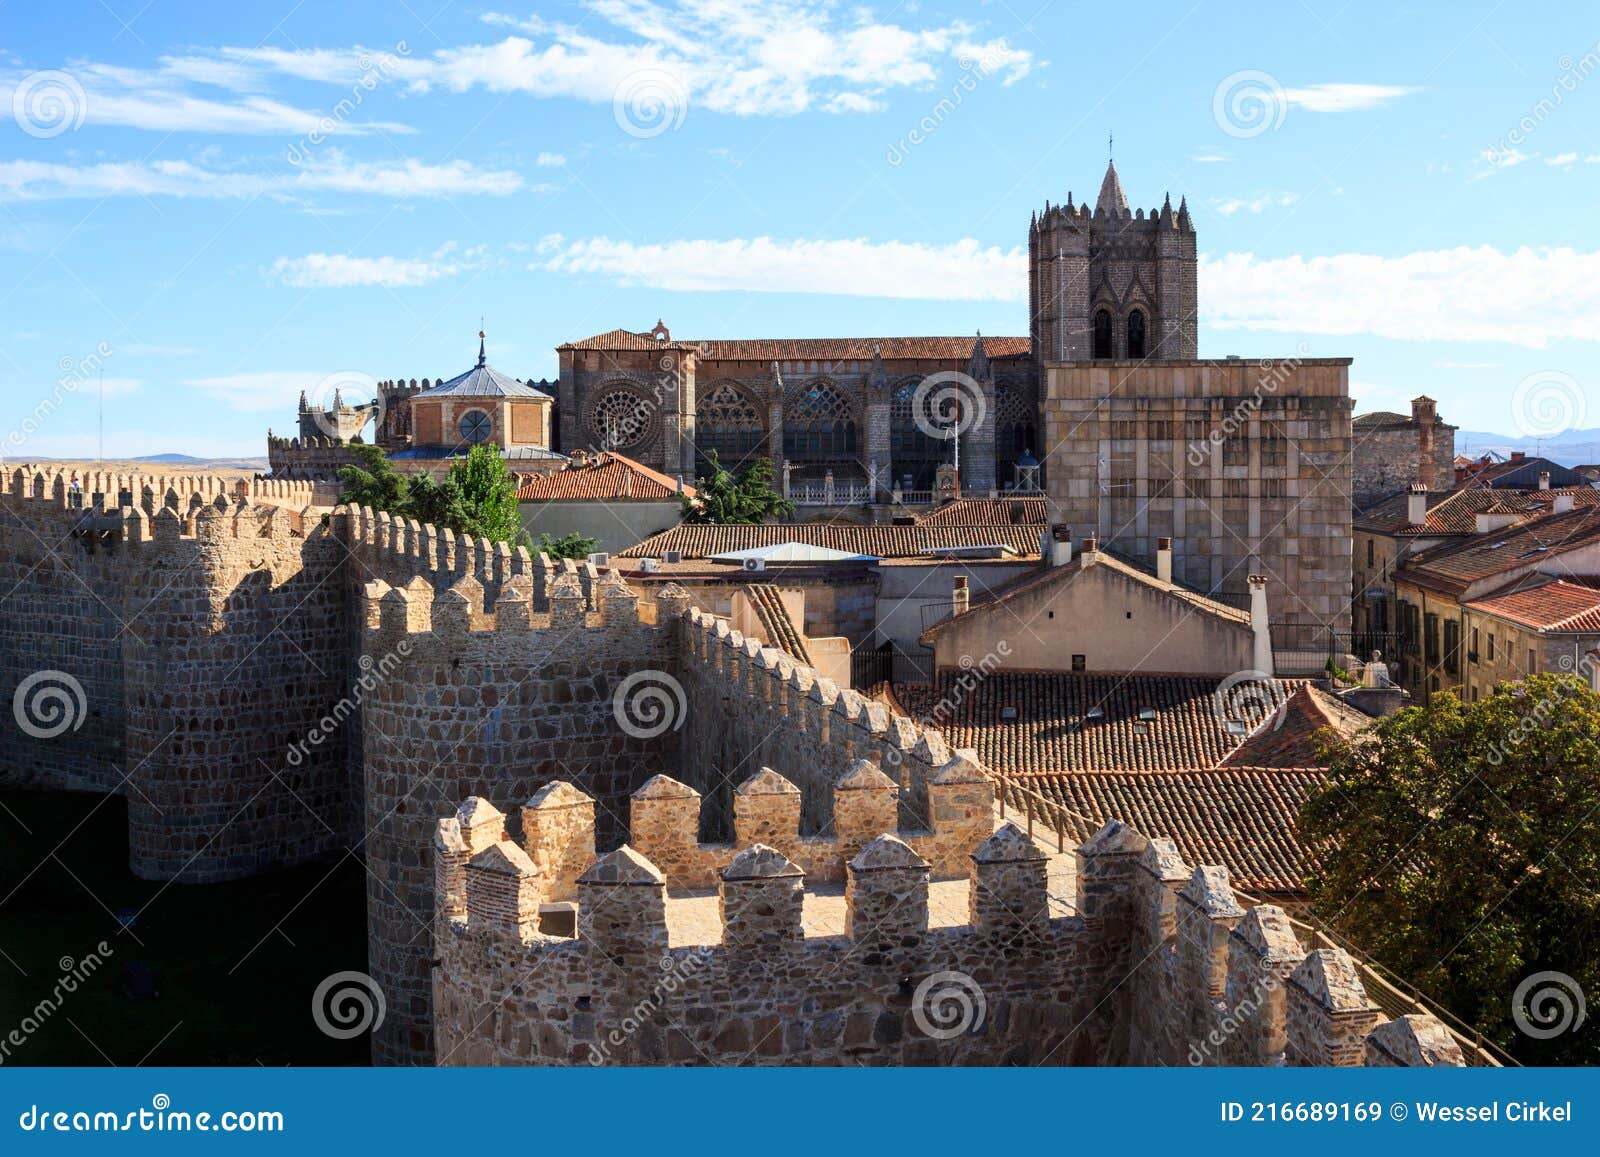 cathedral of avila and the ancient citywalls, spain